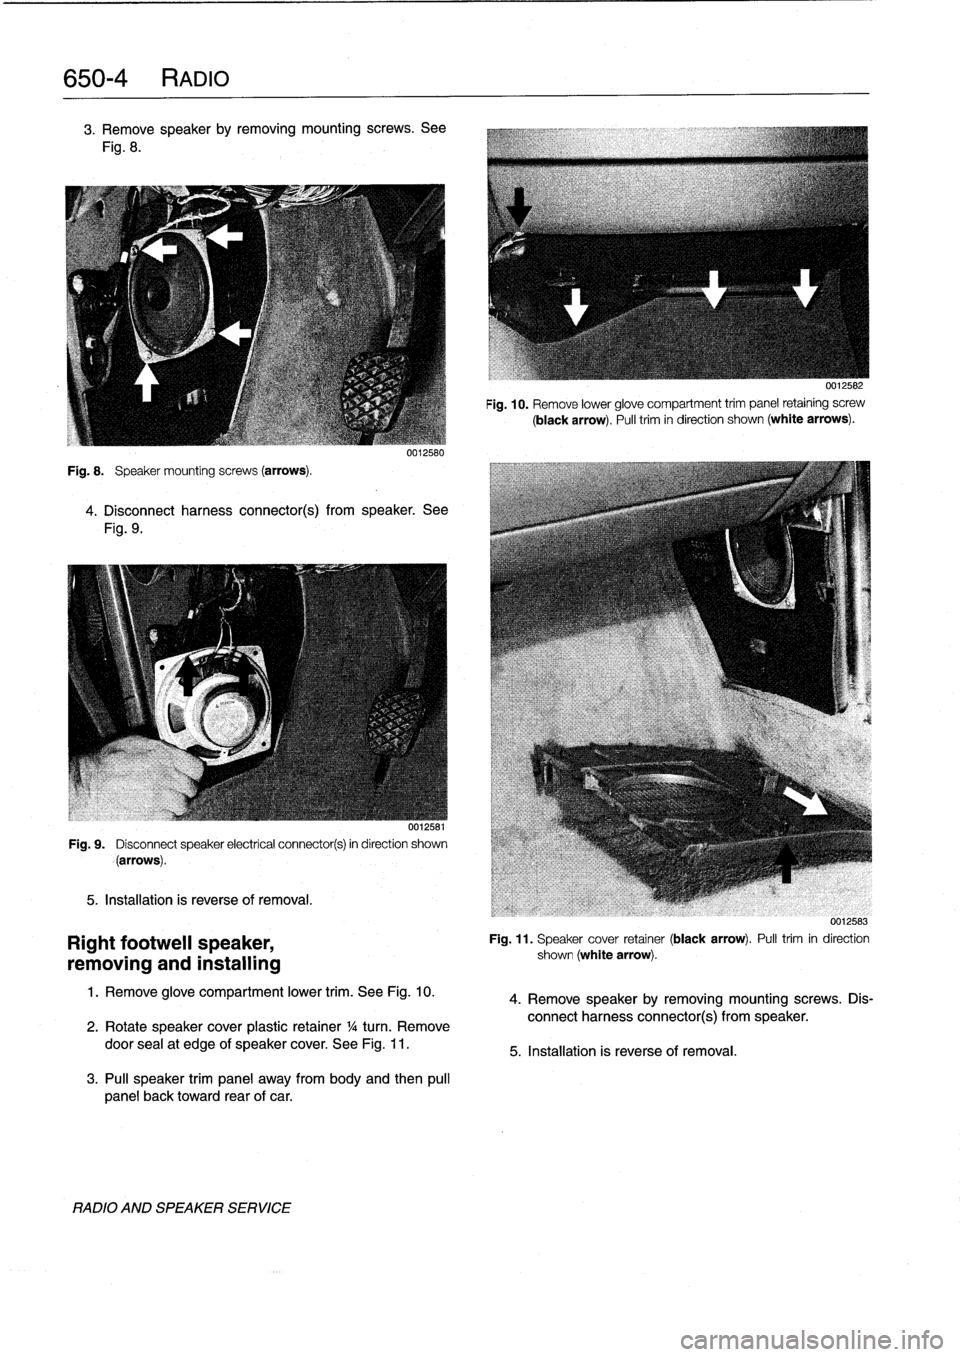 BMW 328i 1997 E36 User Guide 
650-
4
RADIO

3
.
Remove
speakerby
removing
mountingscrews
.
See

Fig
.
8
.

Fig
.
8
.

	

Speaker
mounting
screws
(arrows)
.

0012580

4
.
Disconnect
harness
connector(s)
from
speaker
.
See

Fig
.
9